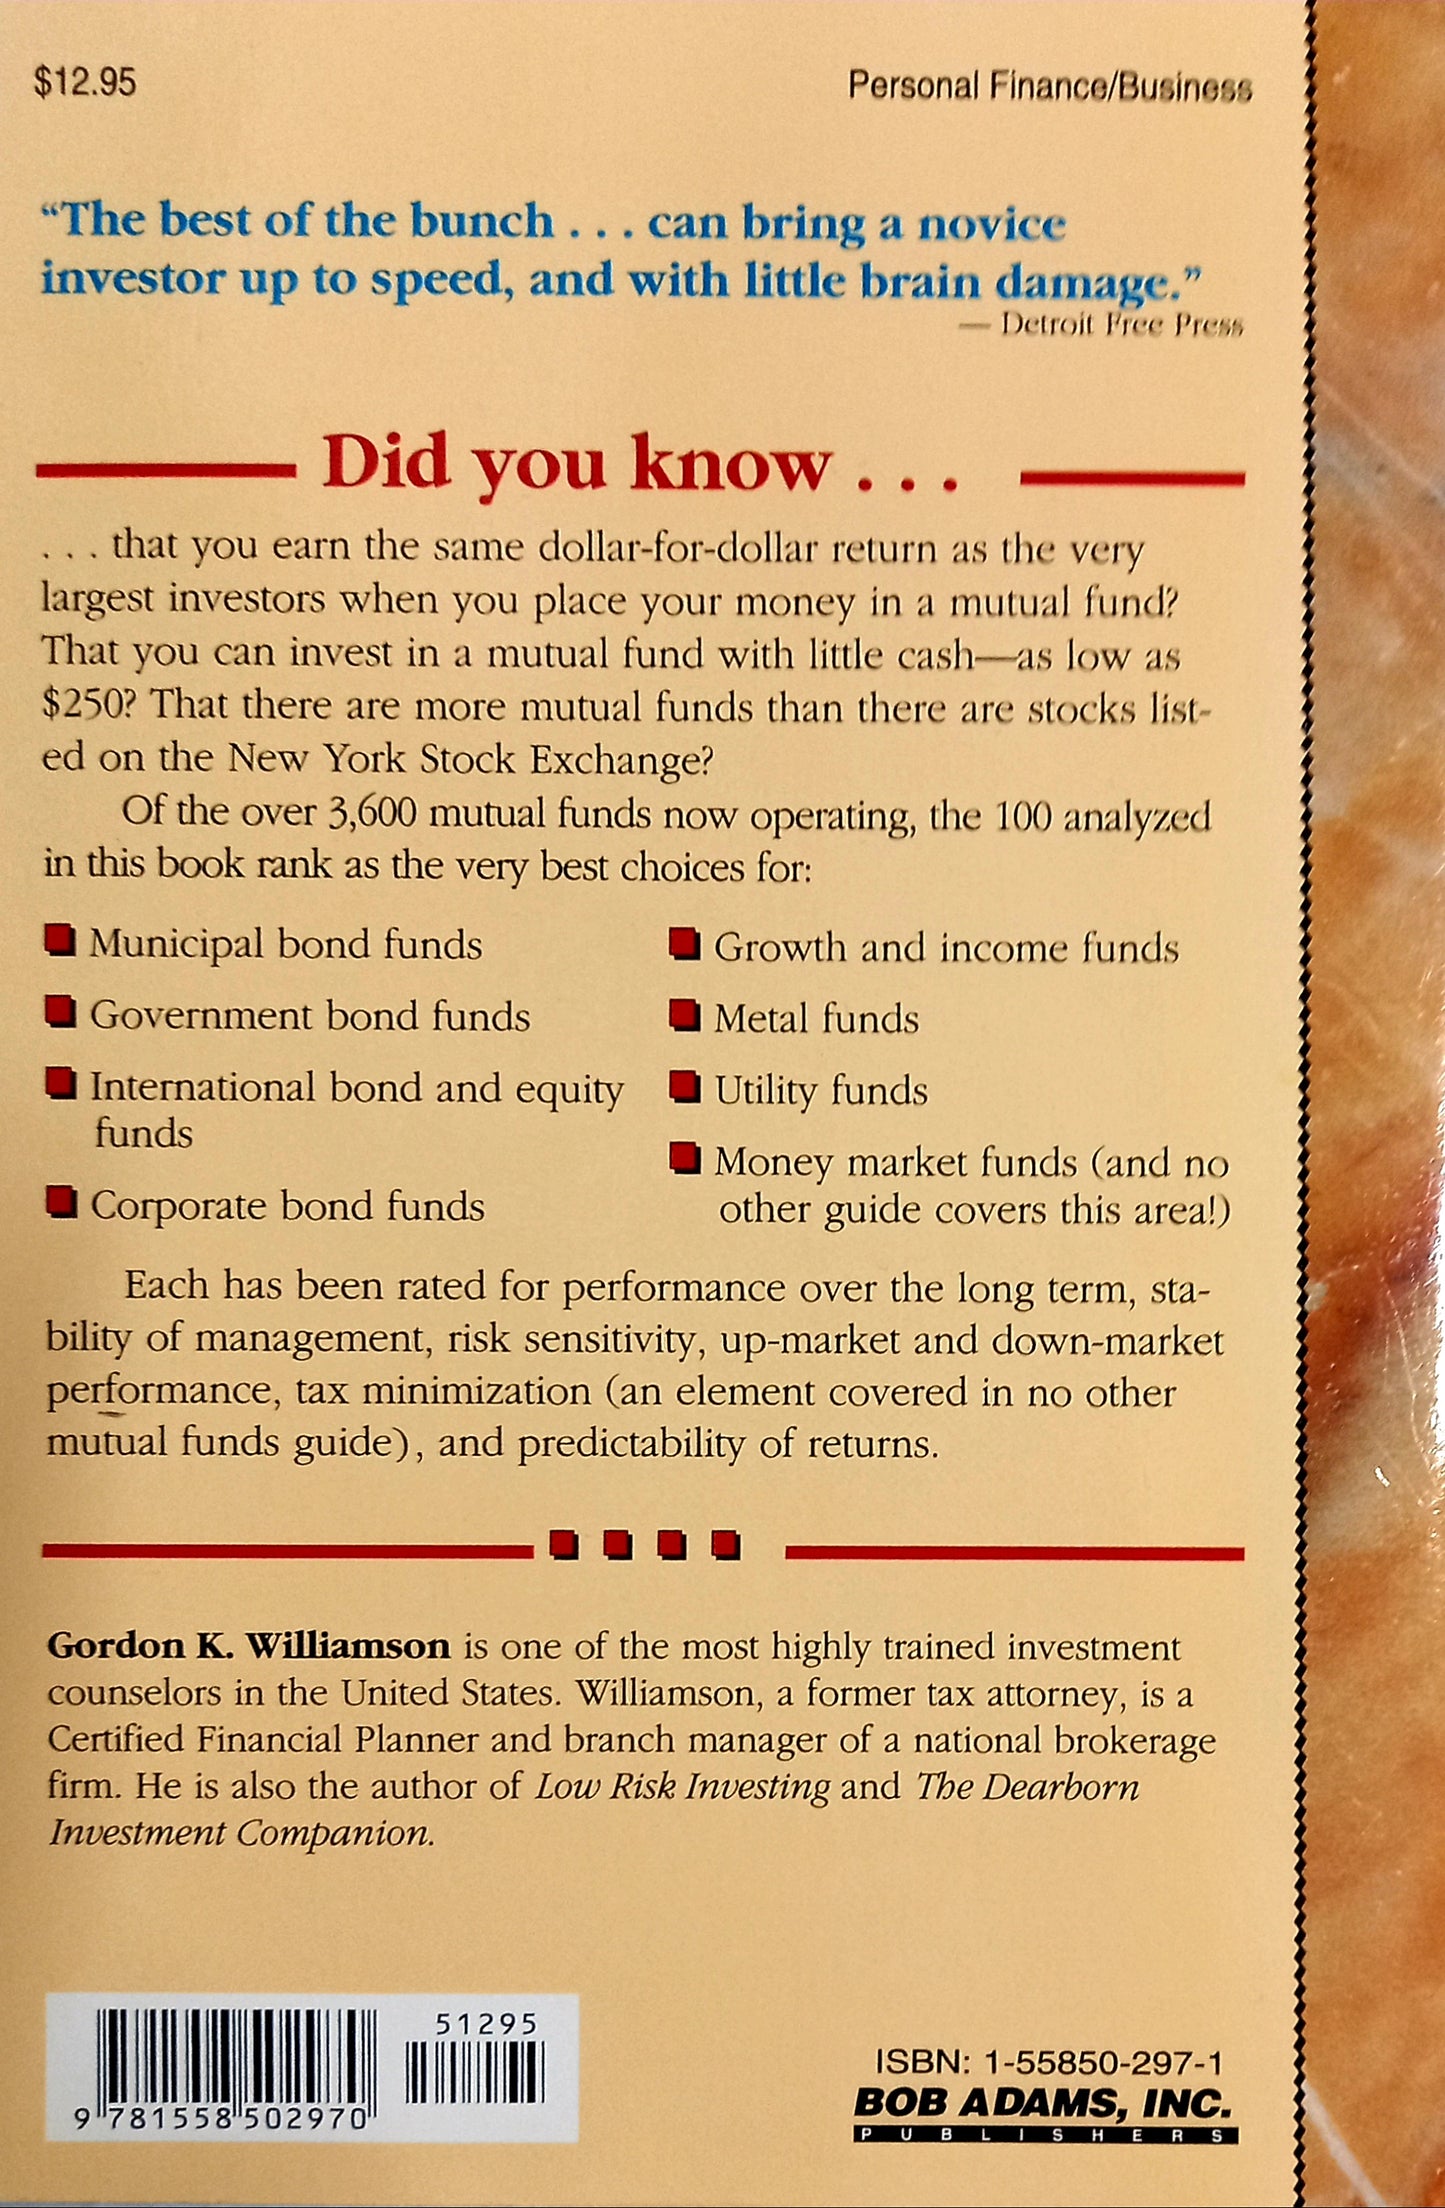 The One Hundred Best Mutual Funds You Can Buy (1994)